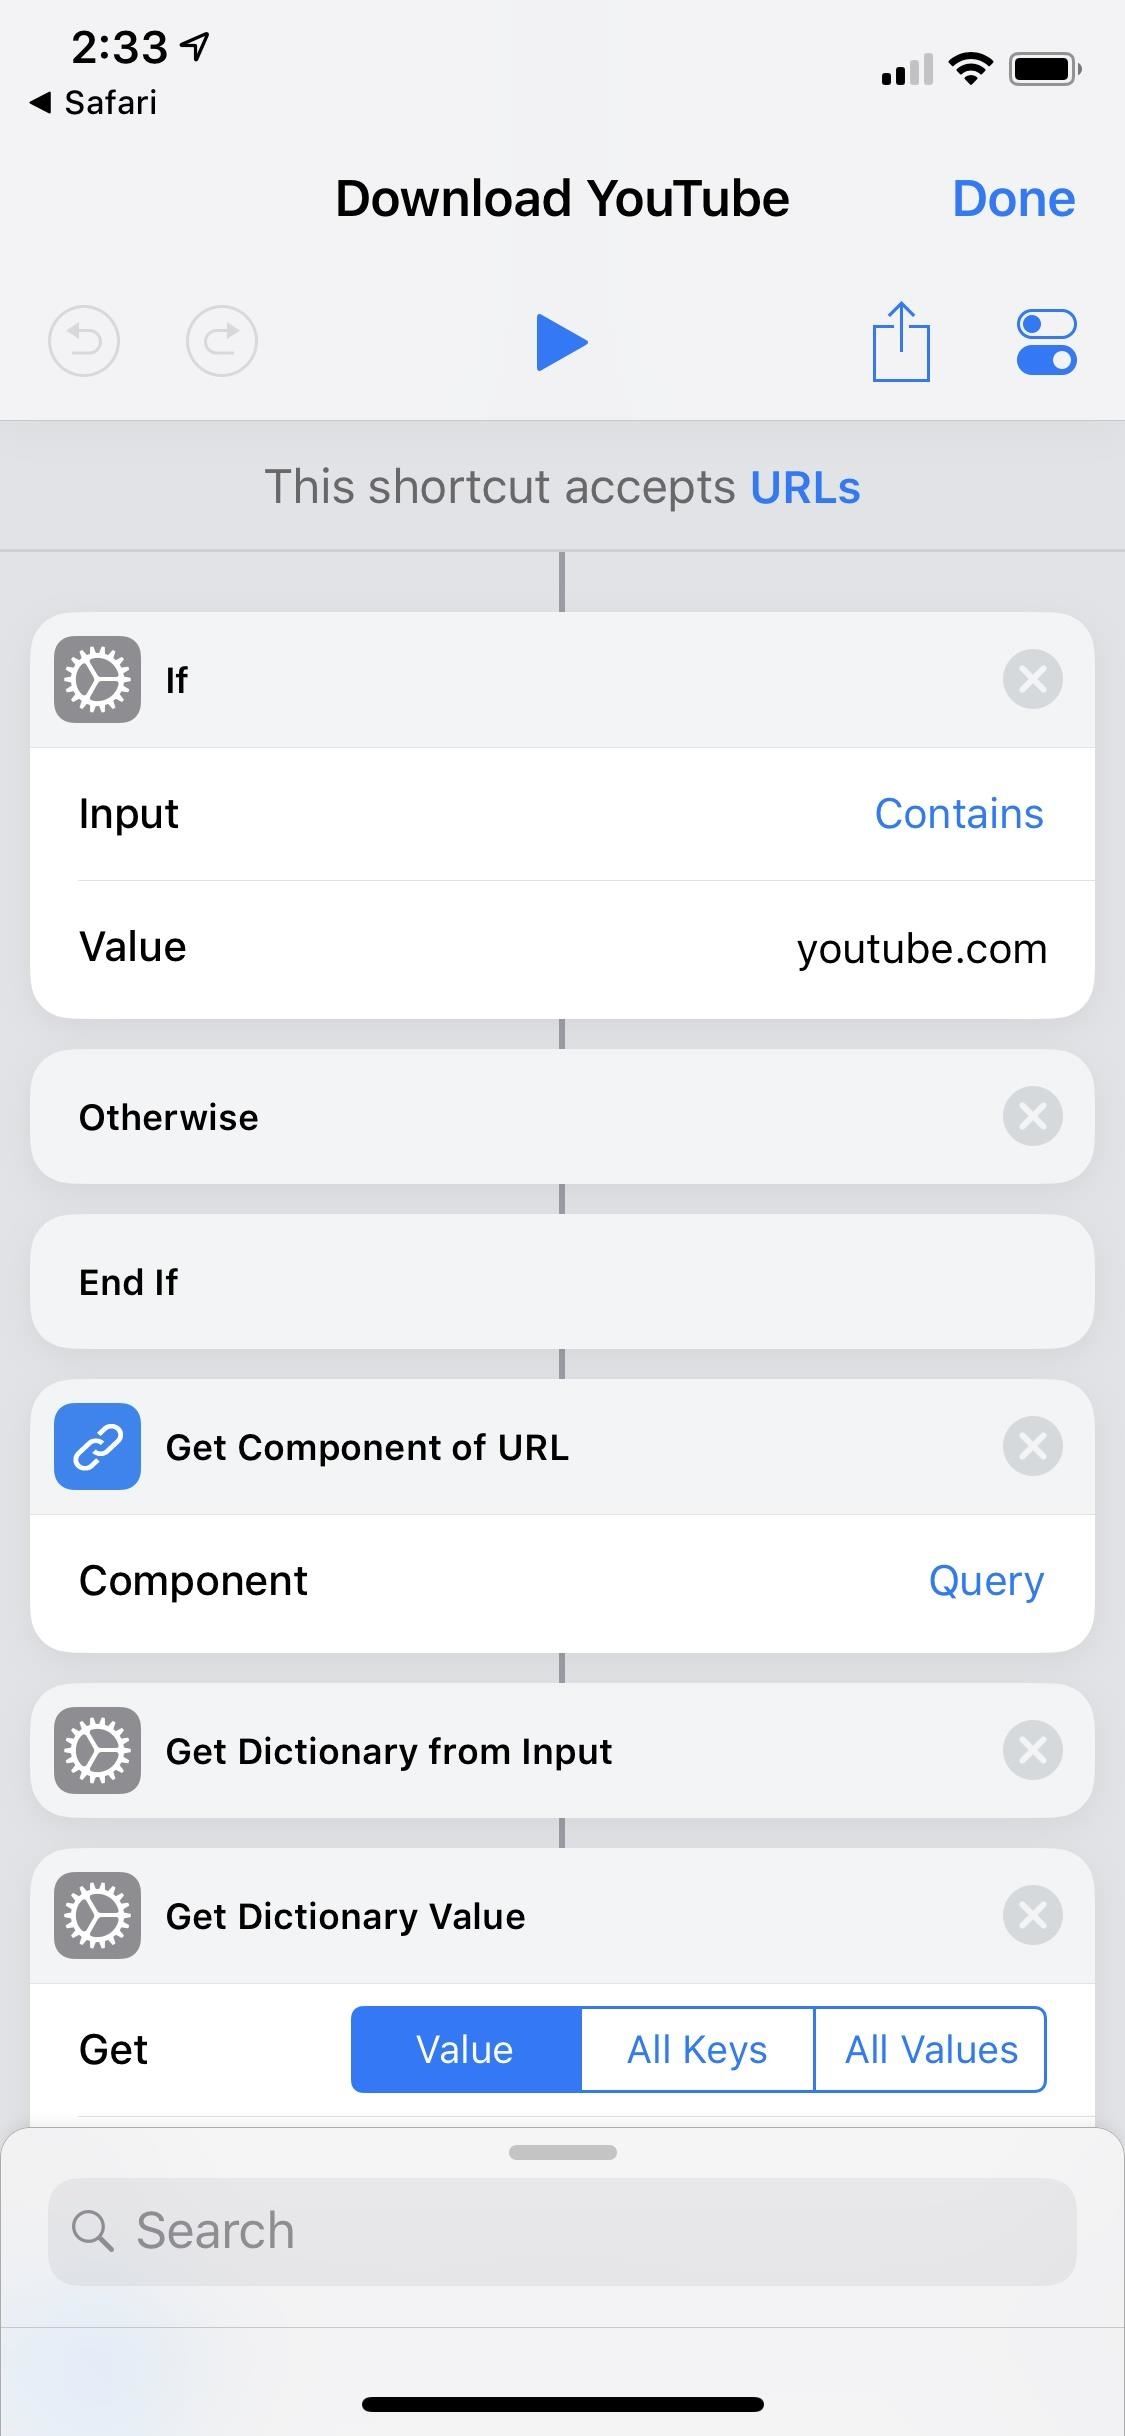 Youtube video downloader for iphone